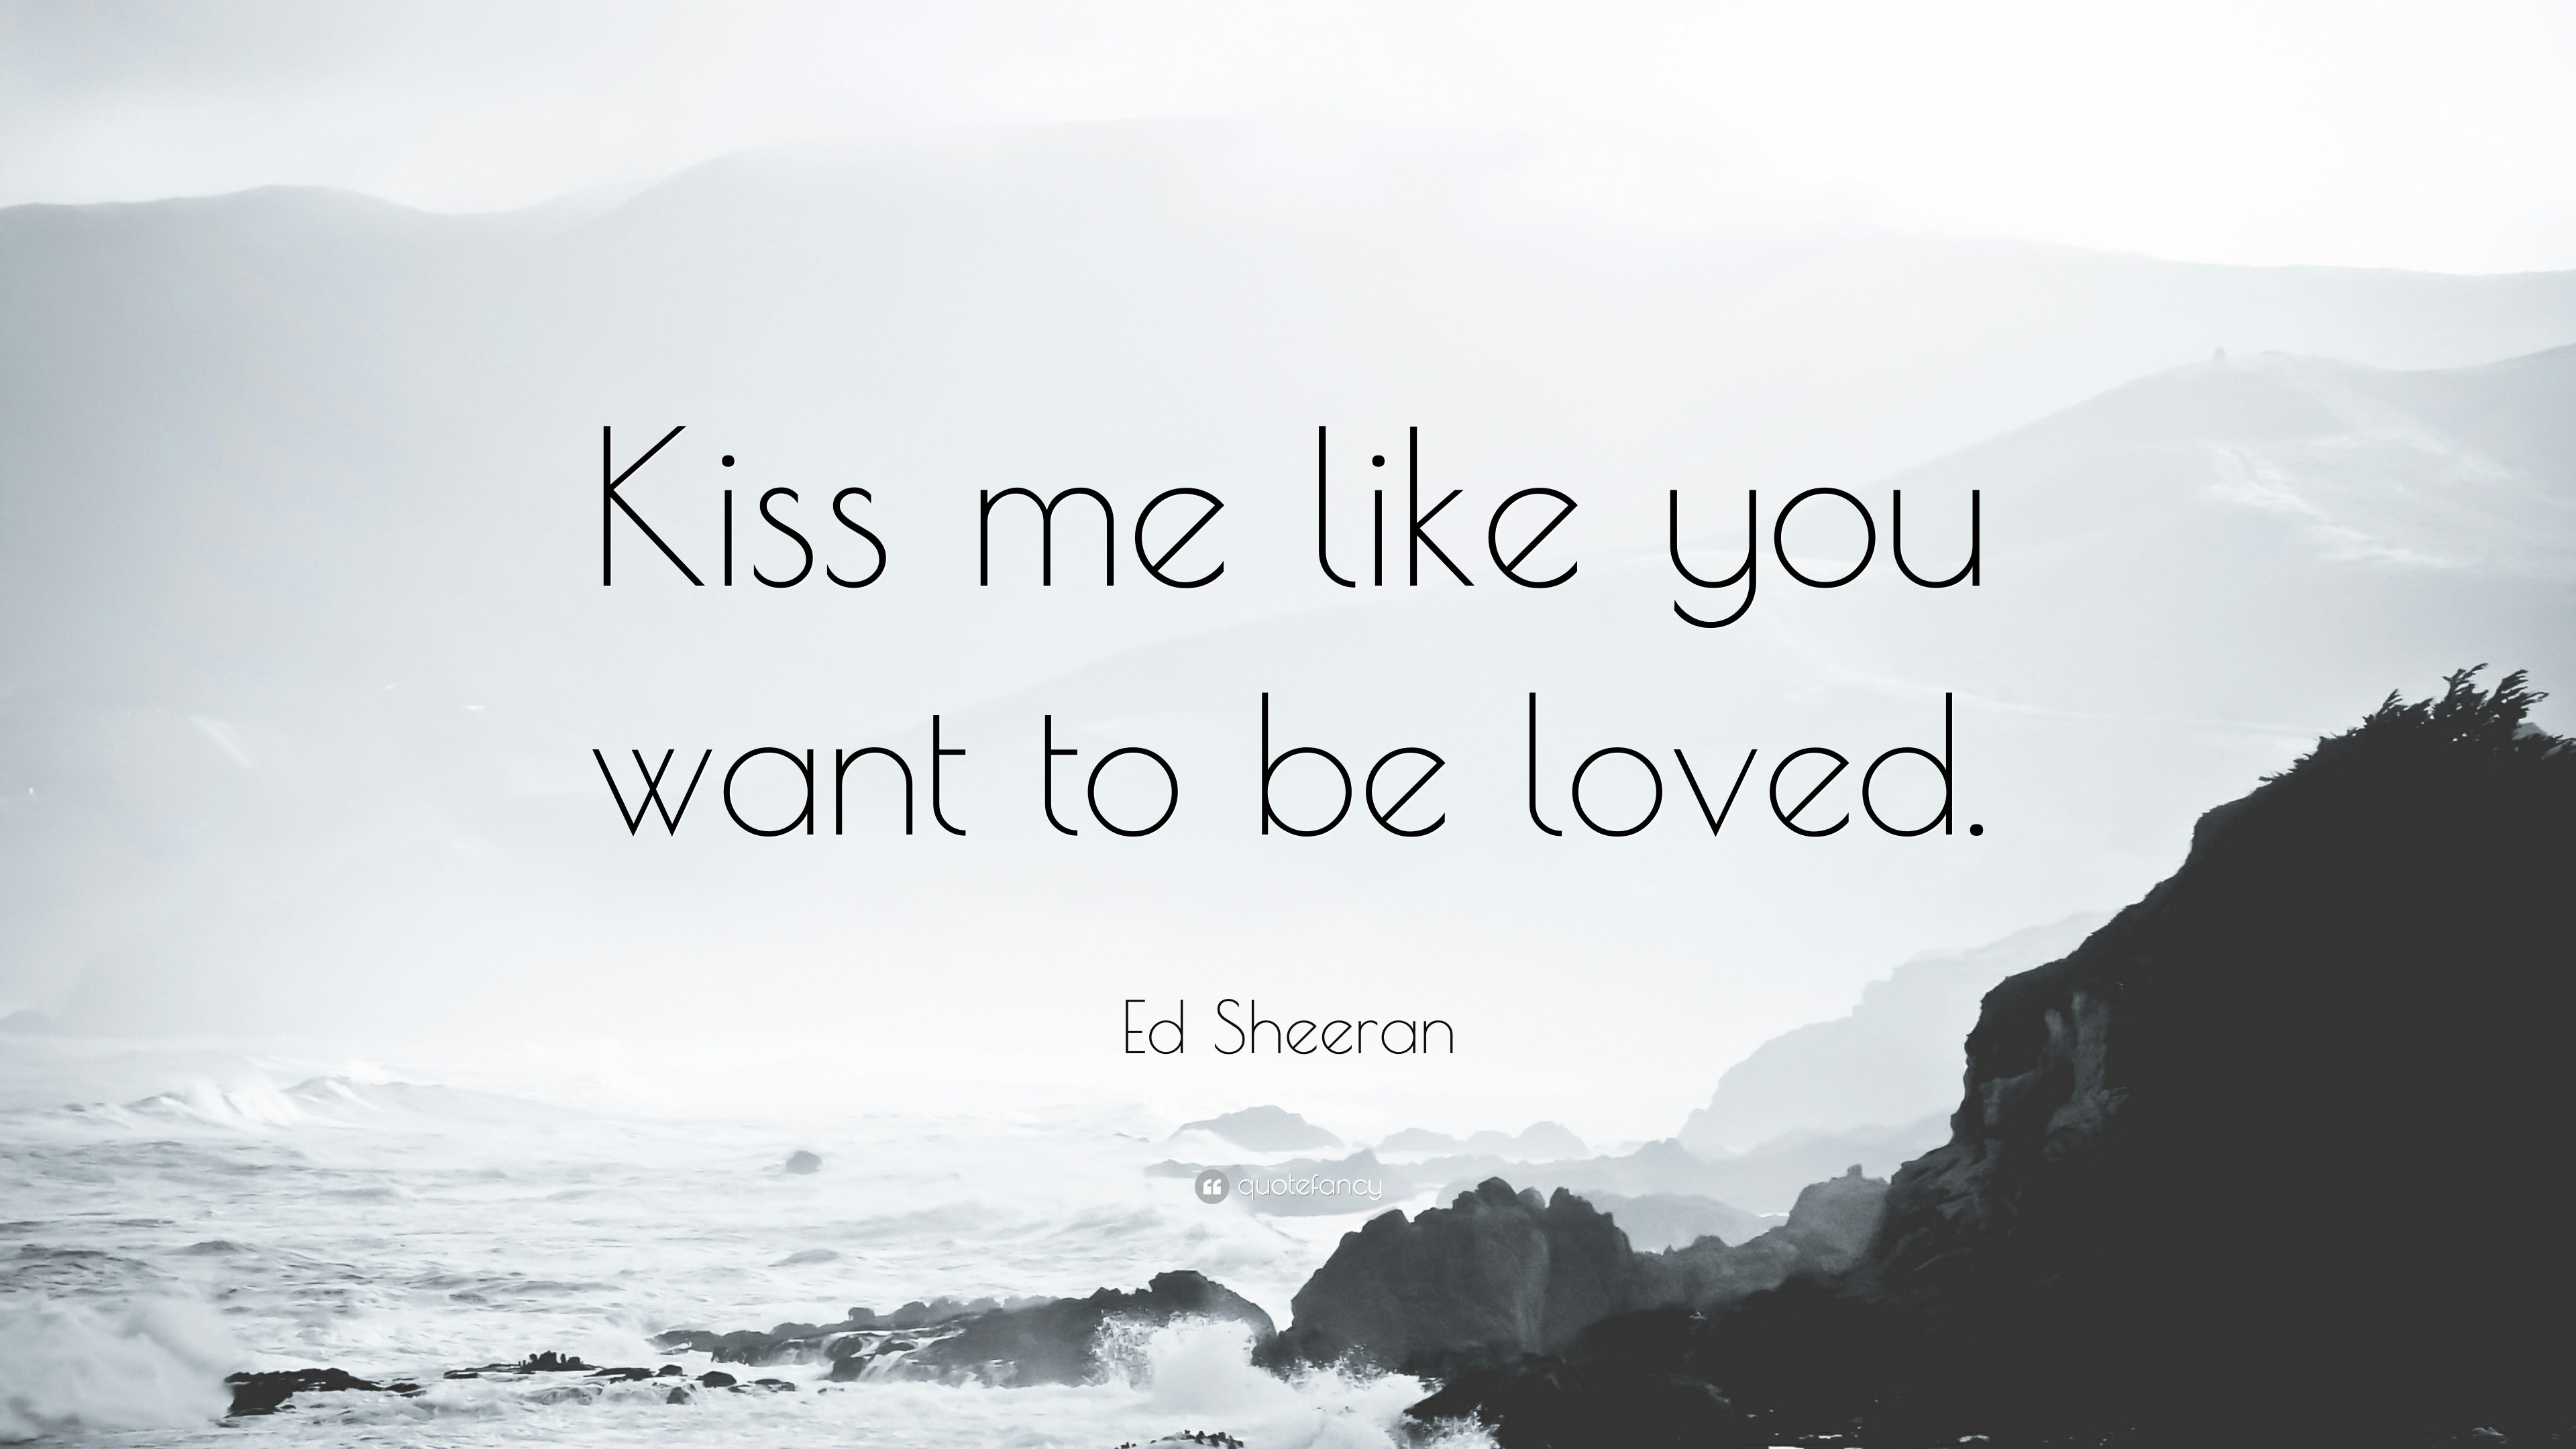 Ed Sheeran Quote “Kiss me like you want to be loved ”